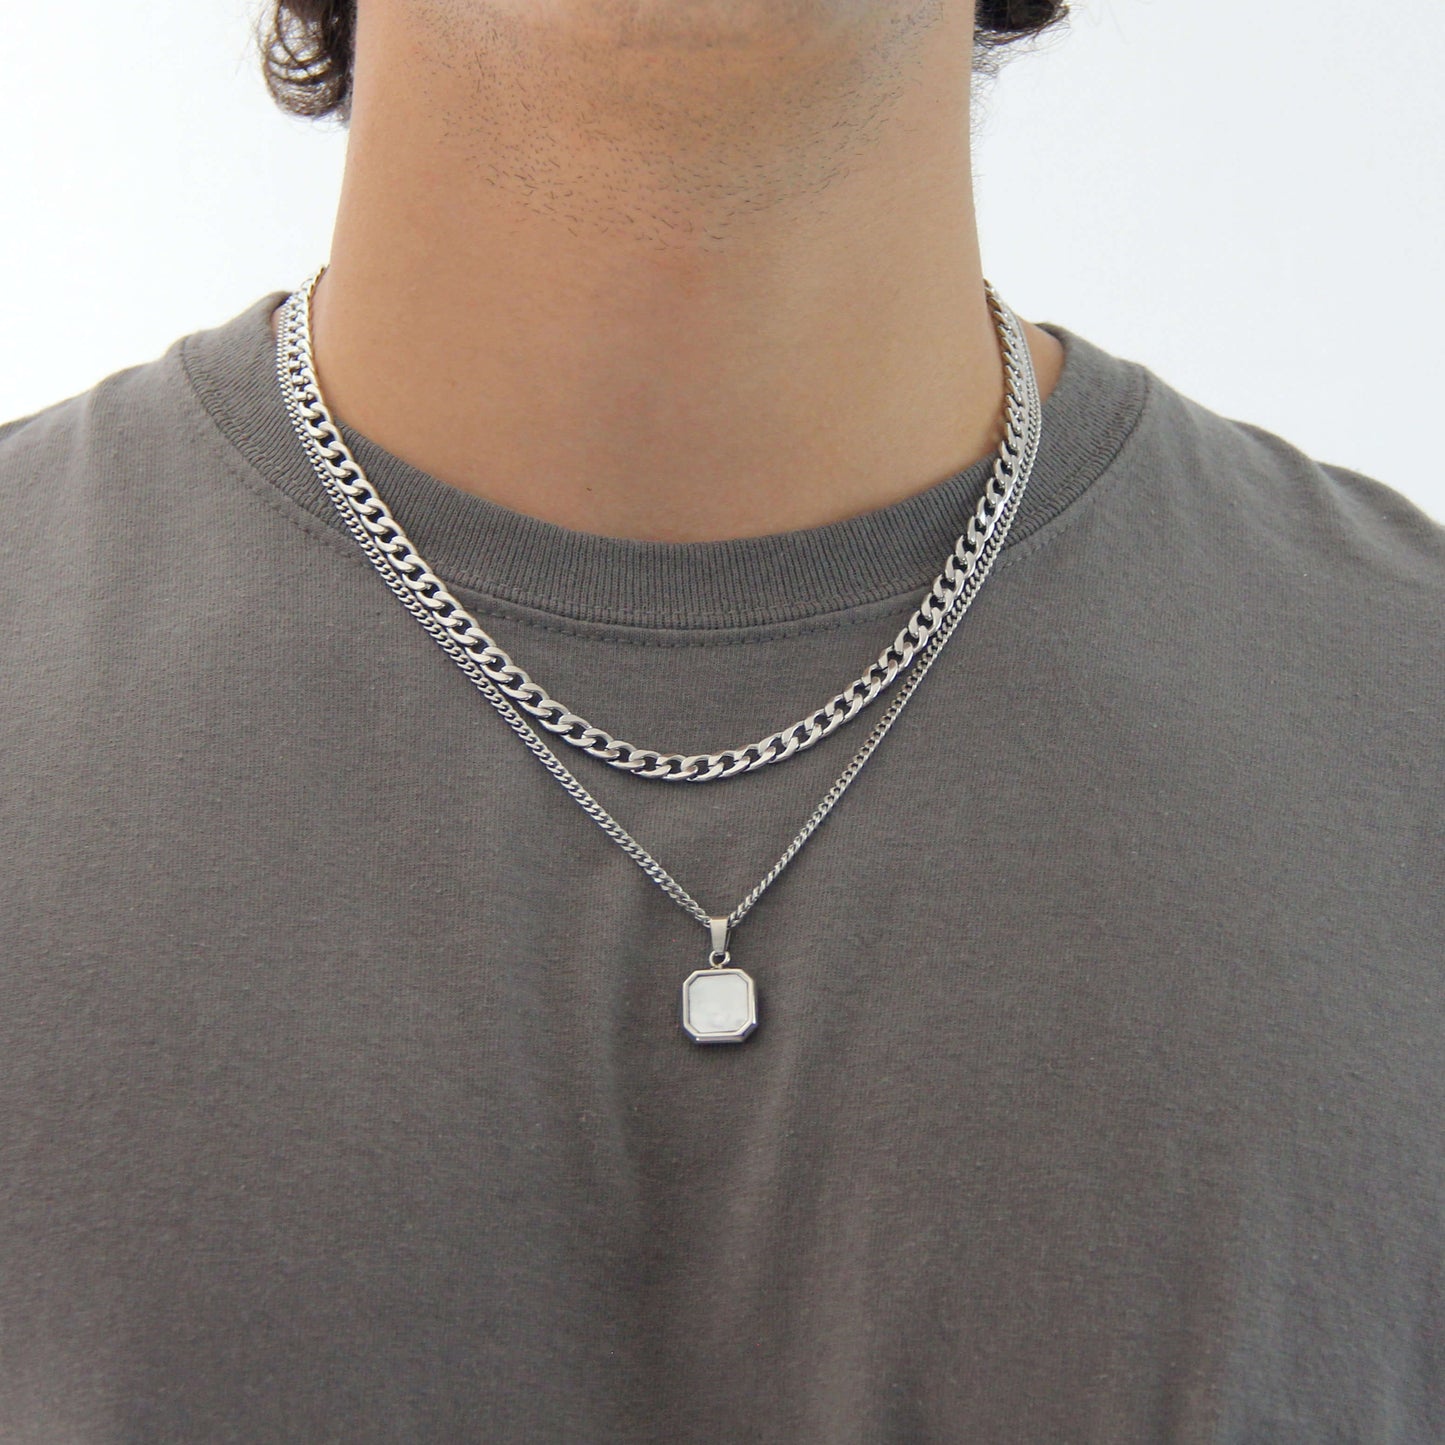 Silver Necklace Set for Men : Black or White Square Pendant Necklace and 6mm Curb Chain - Necklace Set - Boutique Wear RENN